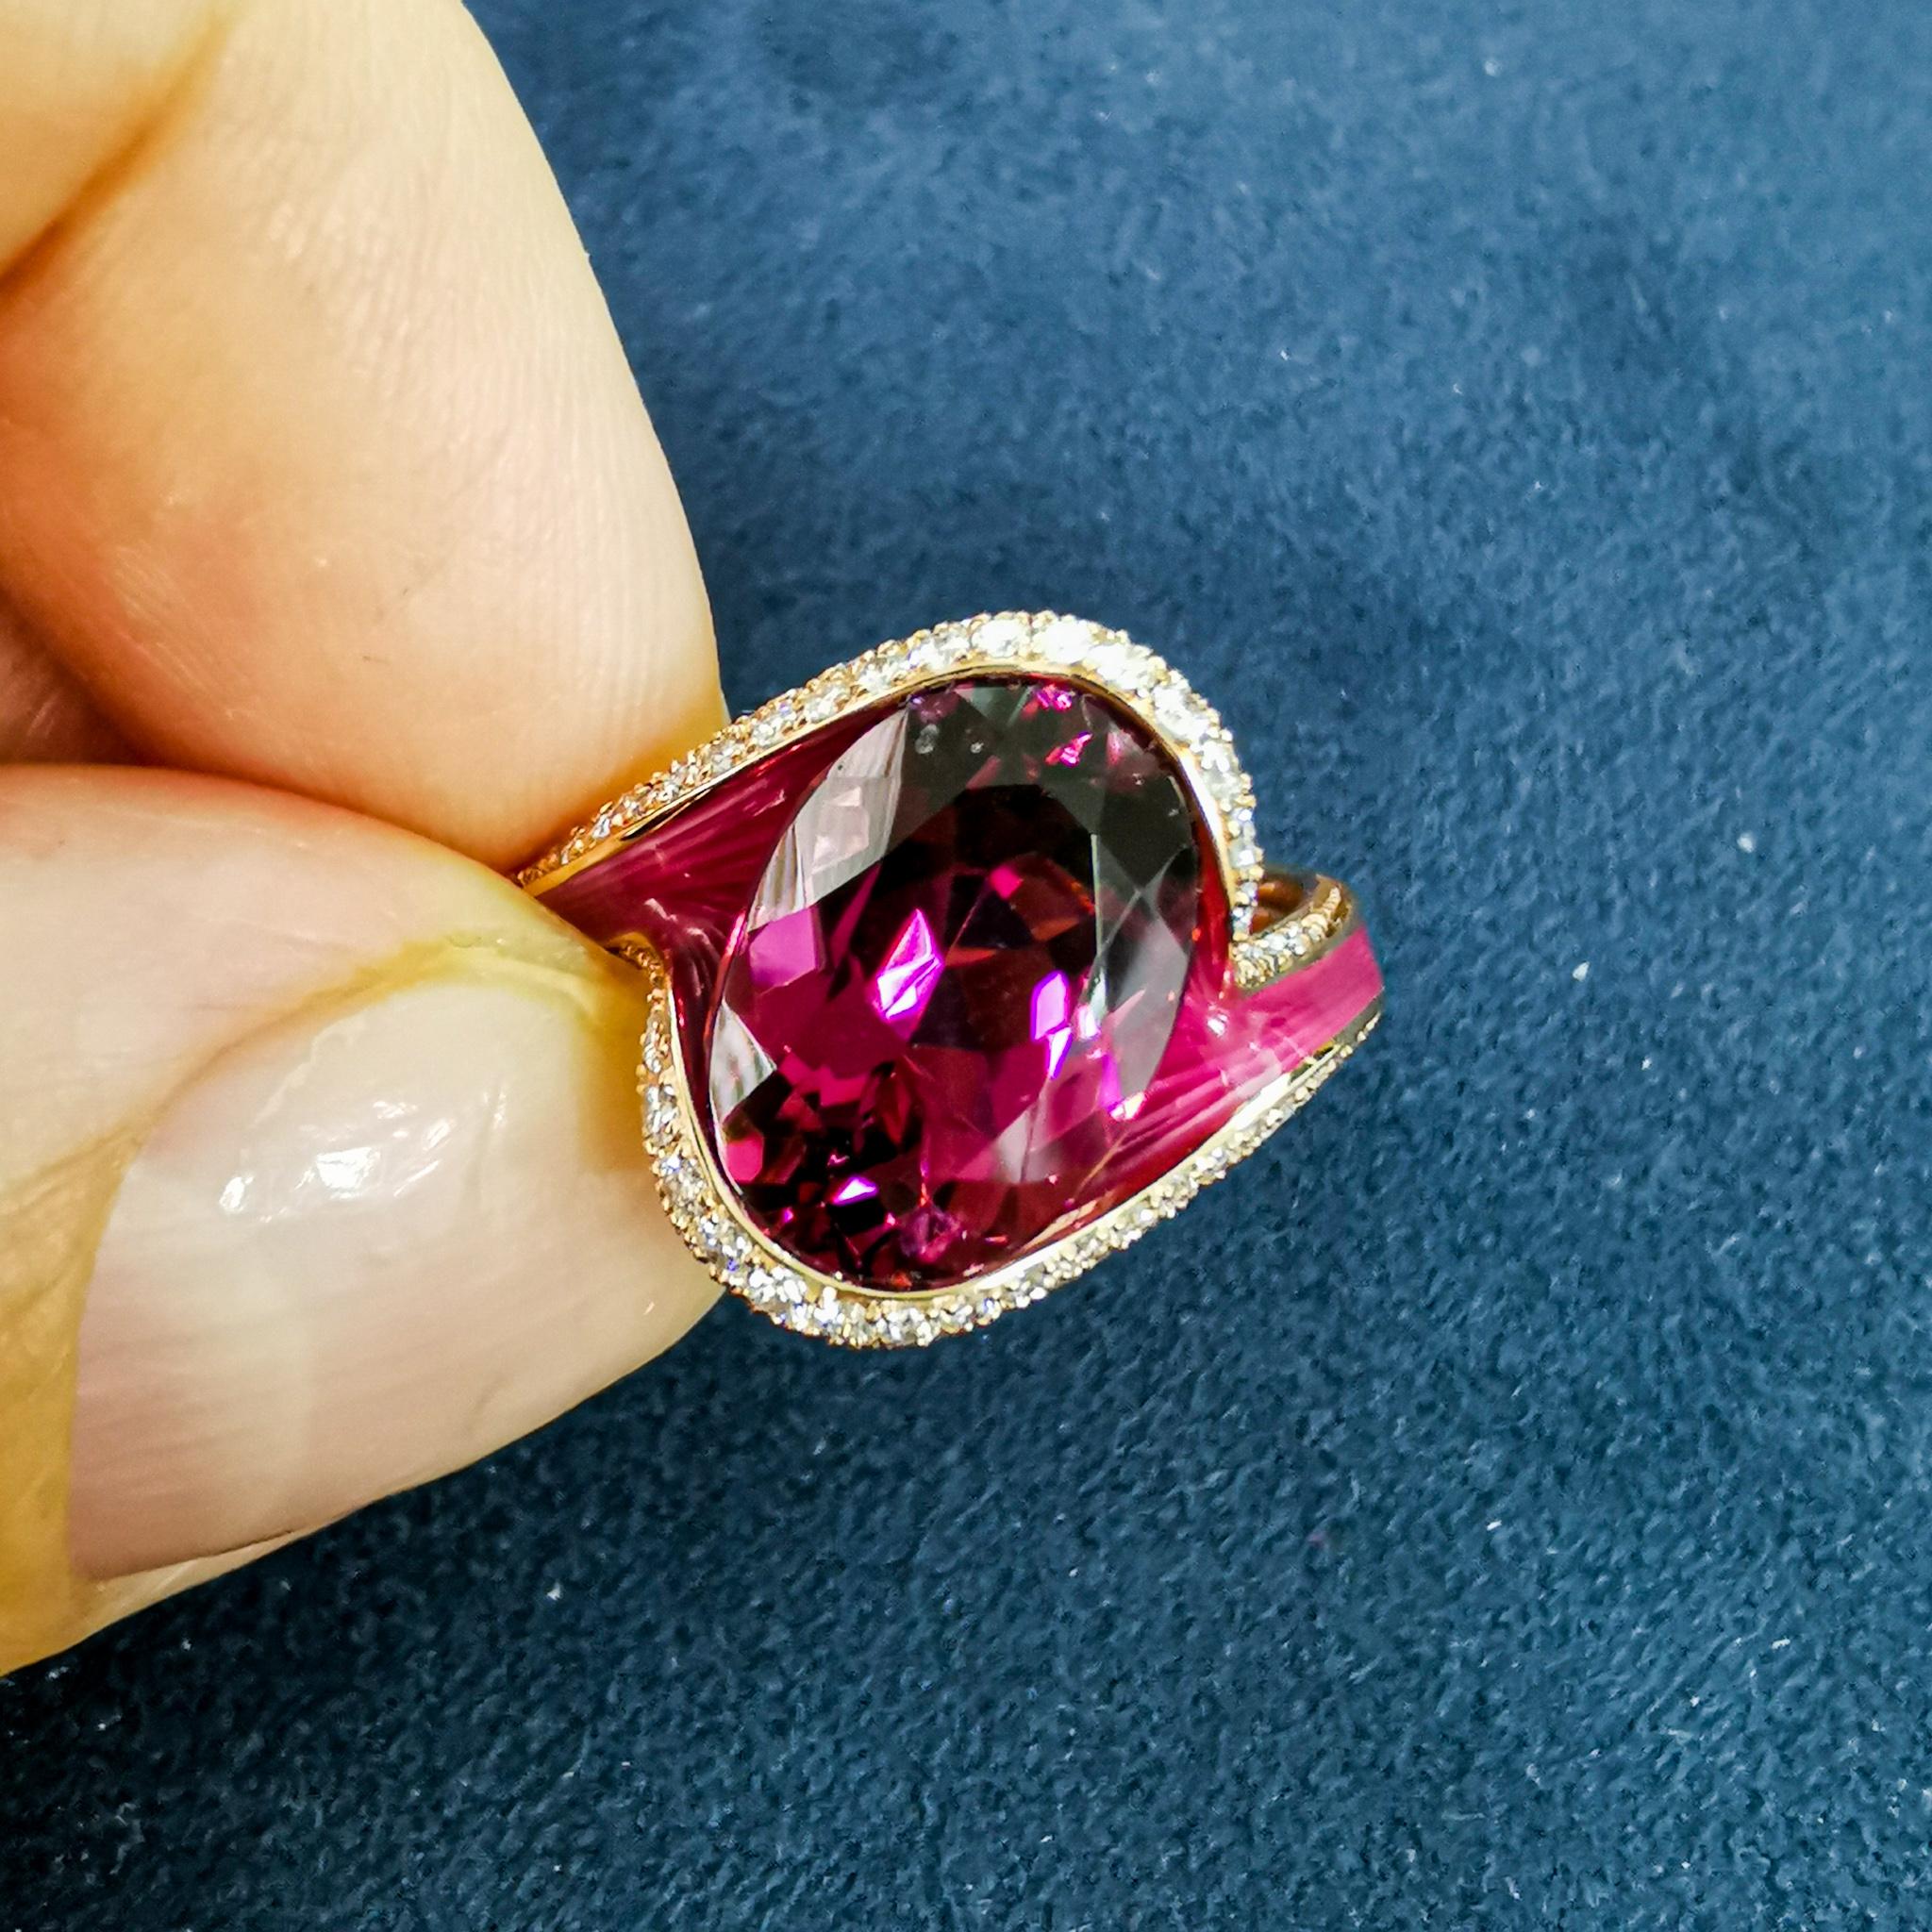 Pink Tourmaline 4.45 Carat Diamonds Enamel 18 Karat Rose Gold Melted Colors Ring
Our new collection 